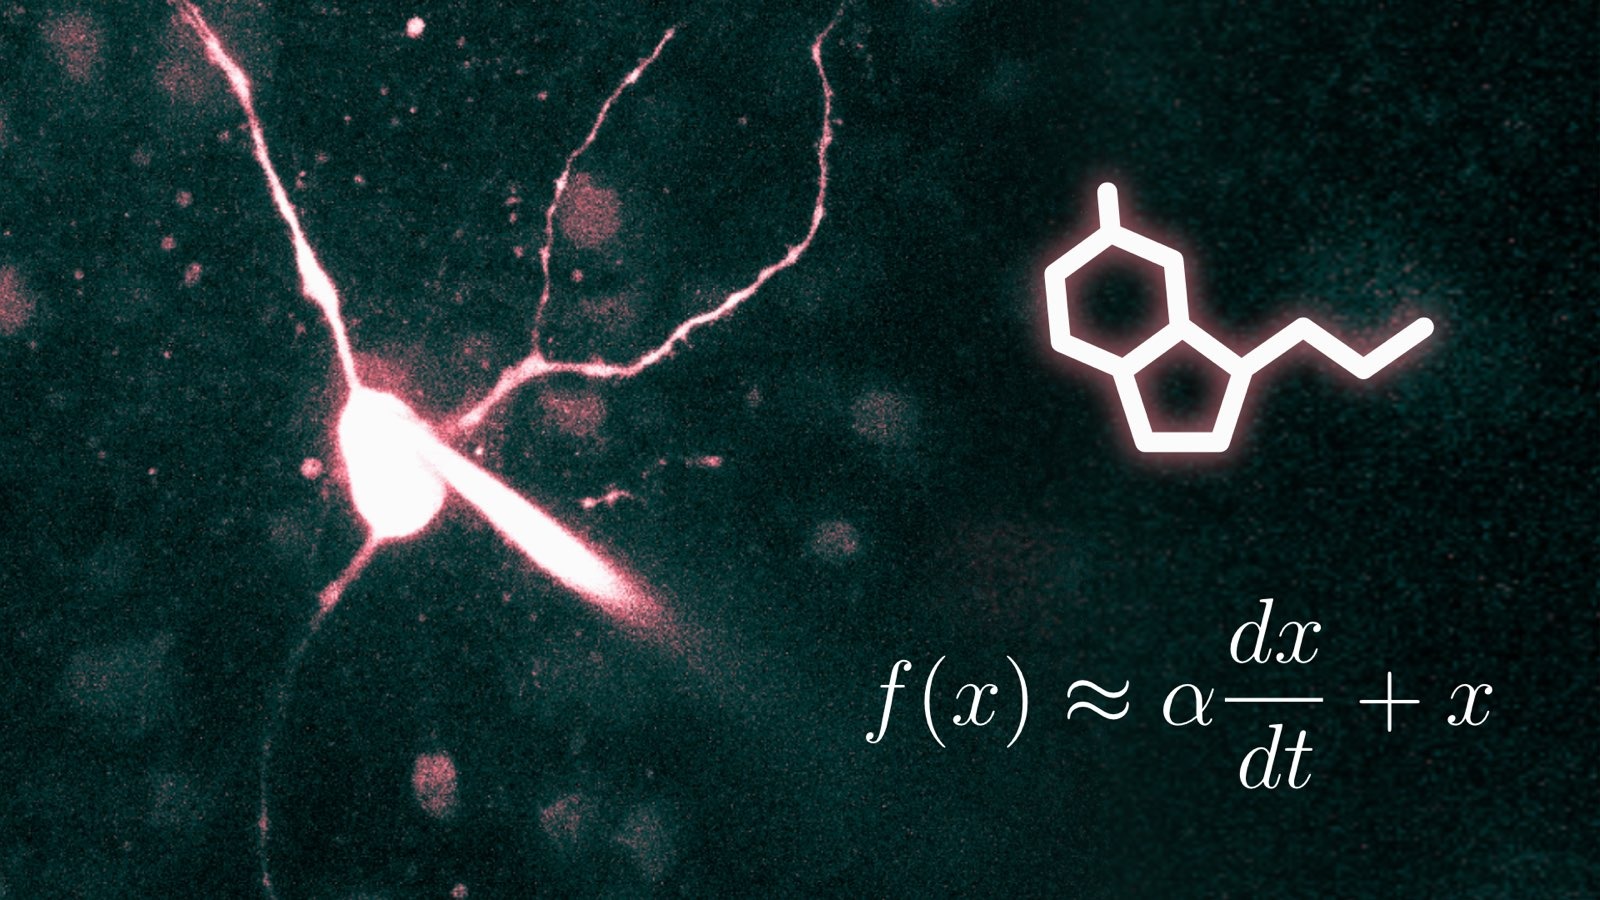 Microscope image of a glowing serotonin neuron. The formula f(x) = alpha dx/dt + x is overlaid on the image.